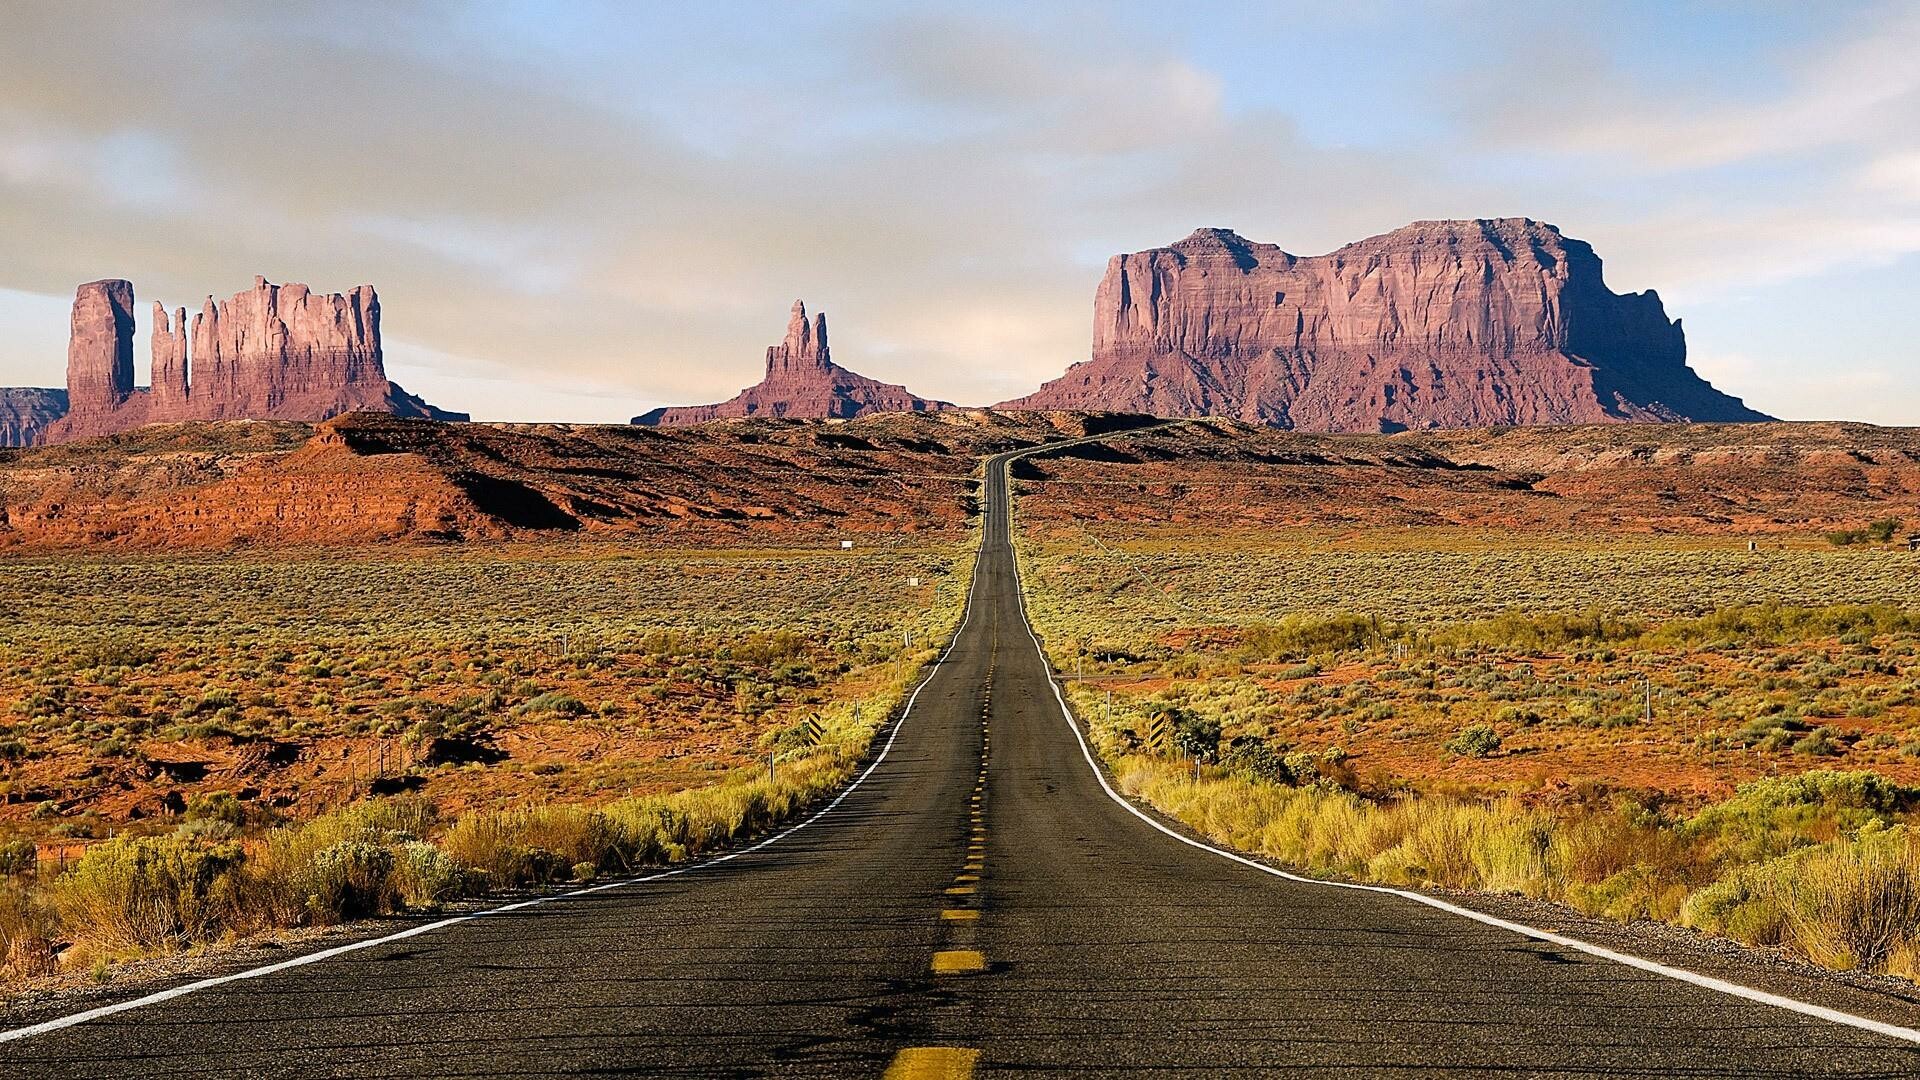 United States: USA Nature, Monument Valley, Natural landscape. 1920x1080 Full HD Background.